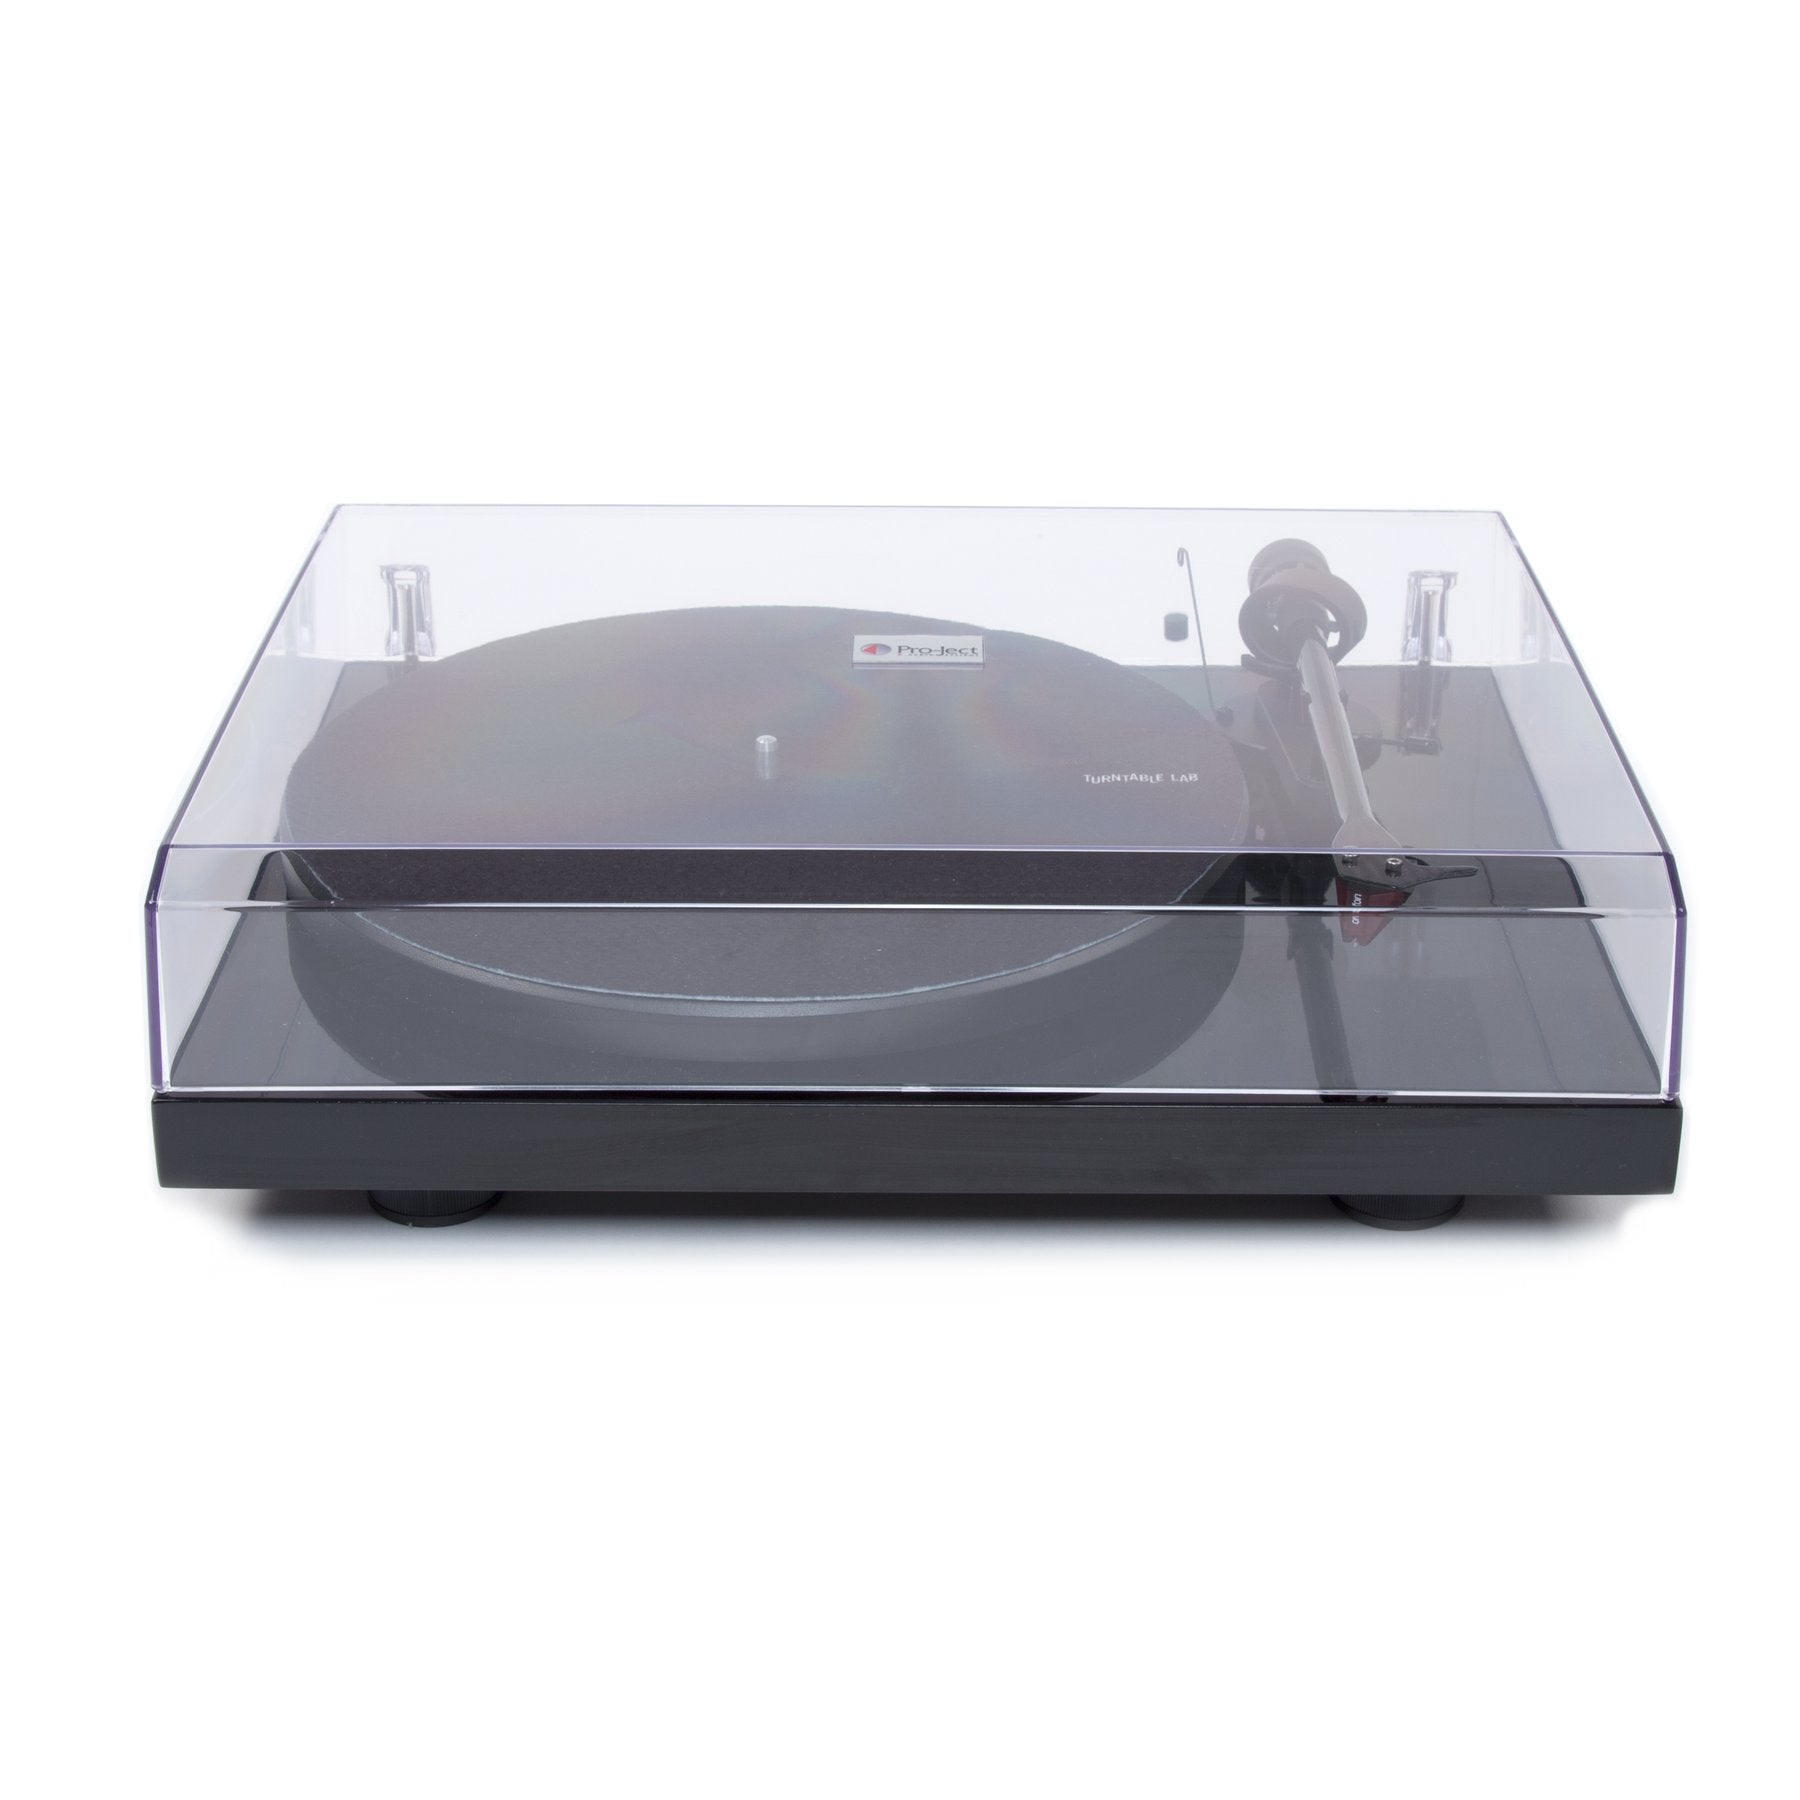 Pro-Ject: Debut Carbon DC Turntable - White